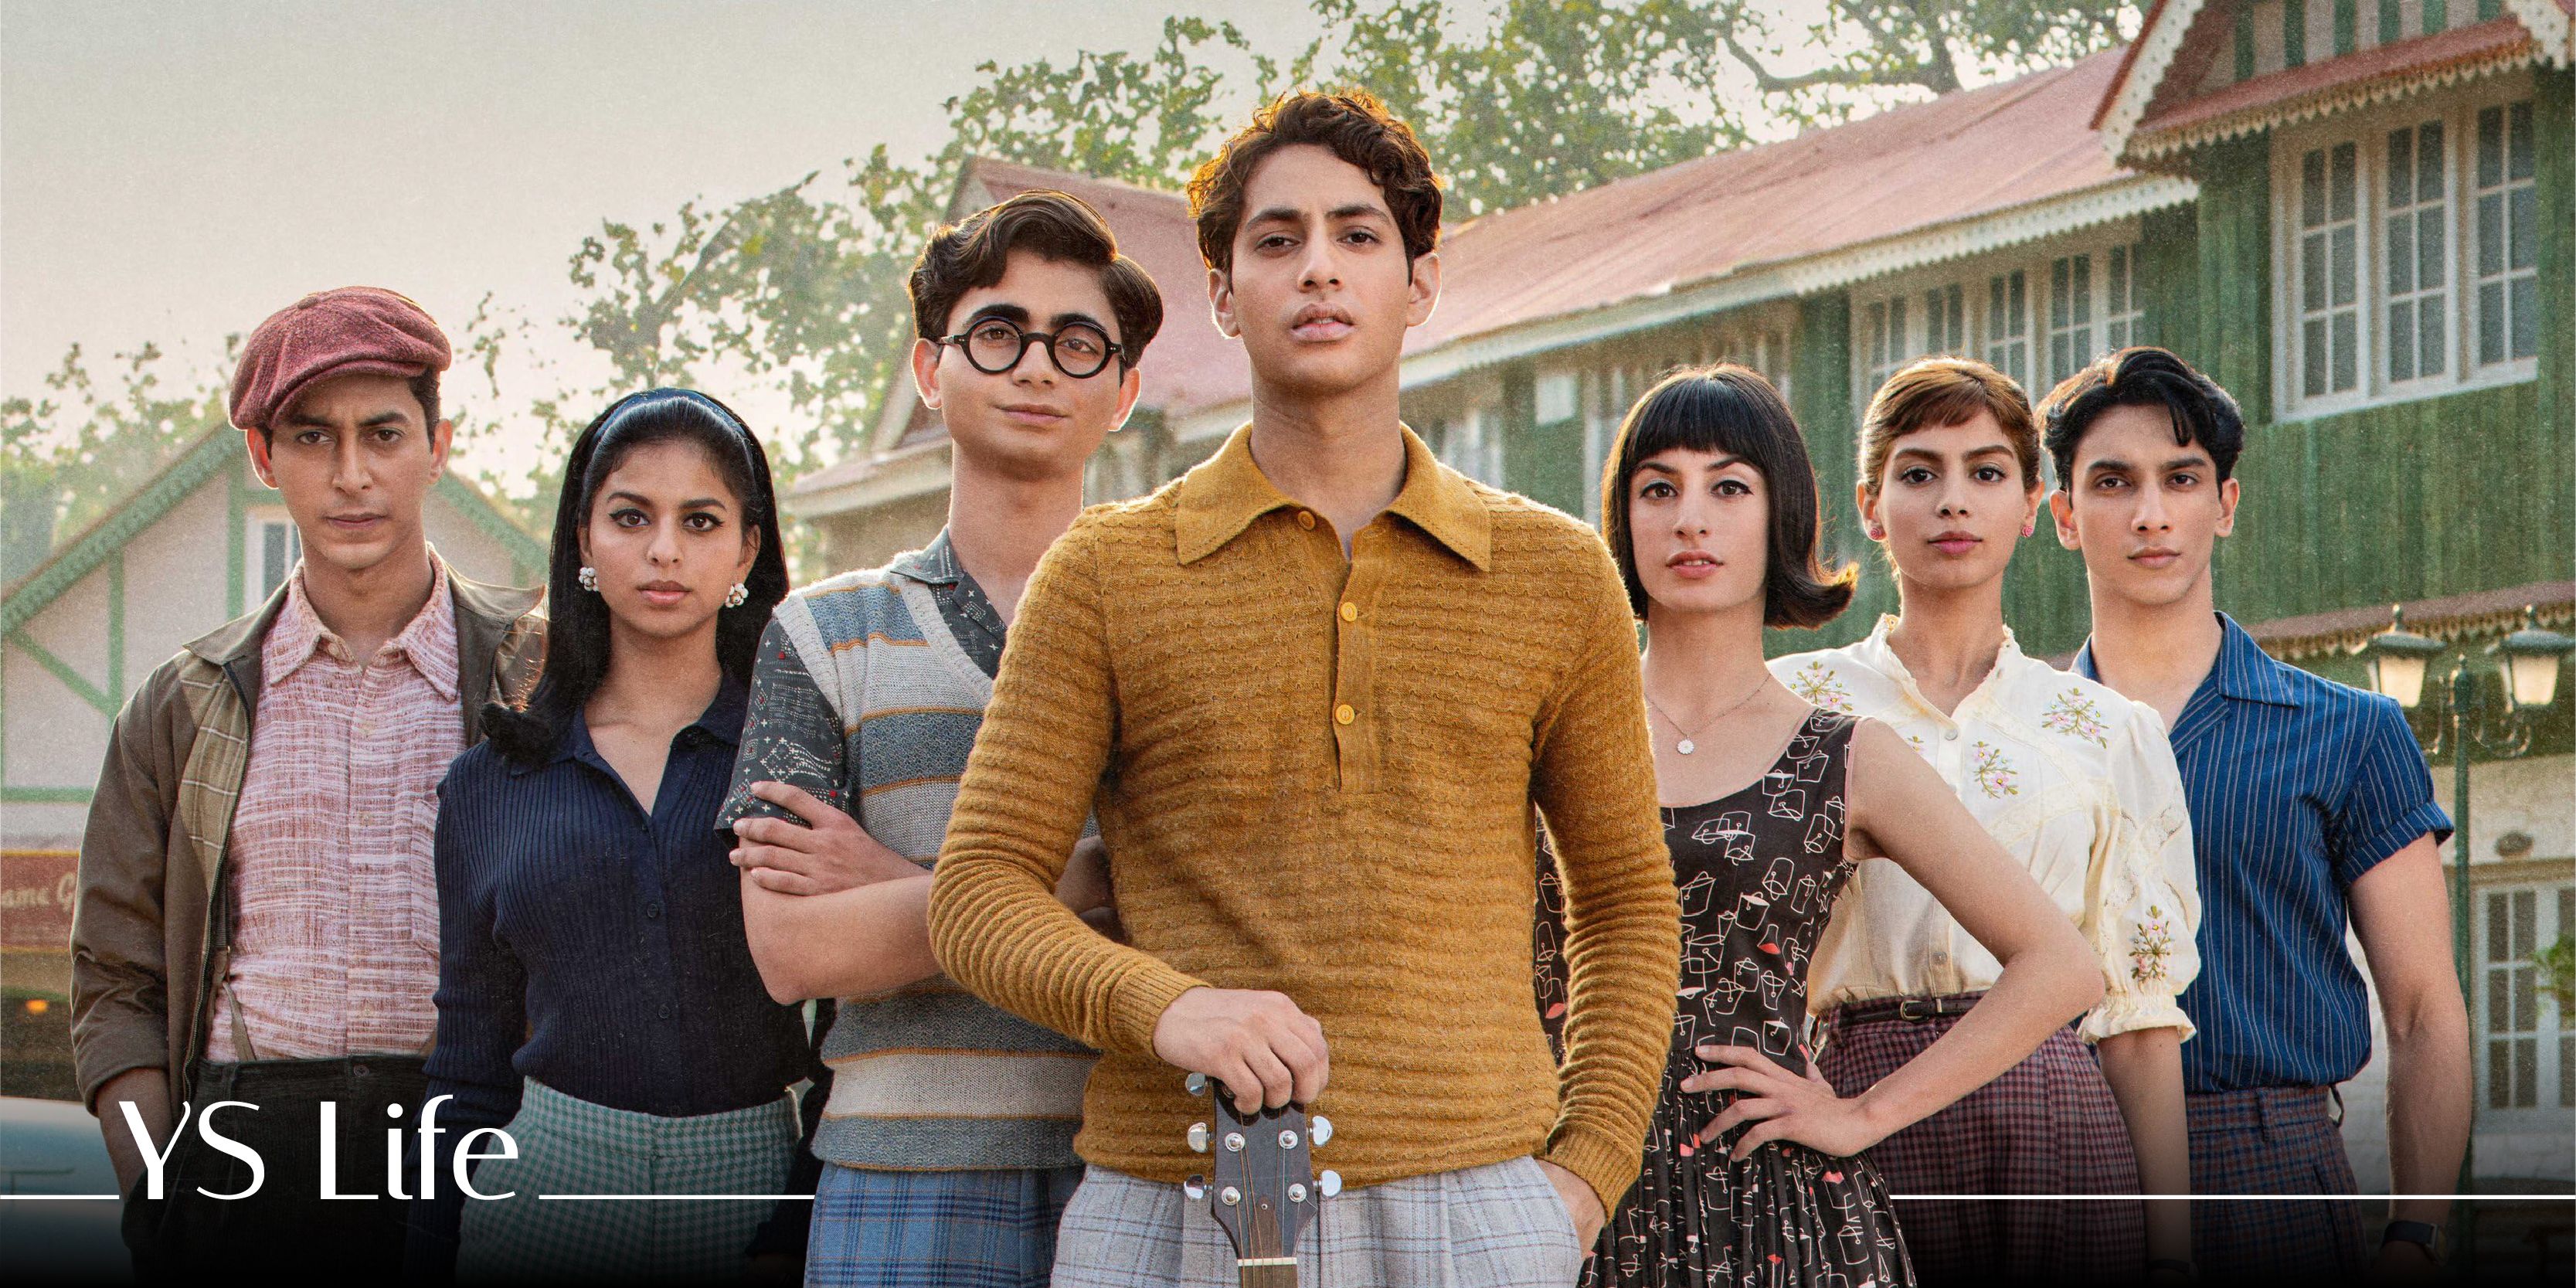 Sweet and visually stunning: Zoya Akhtar’s The Archies is an easy musical watch and a trip down memory lane 